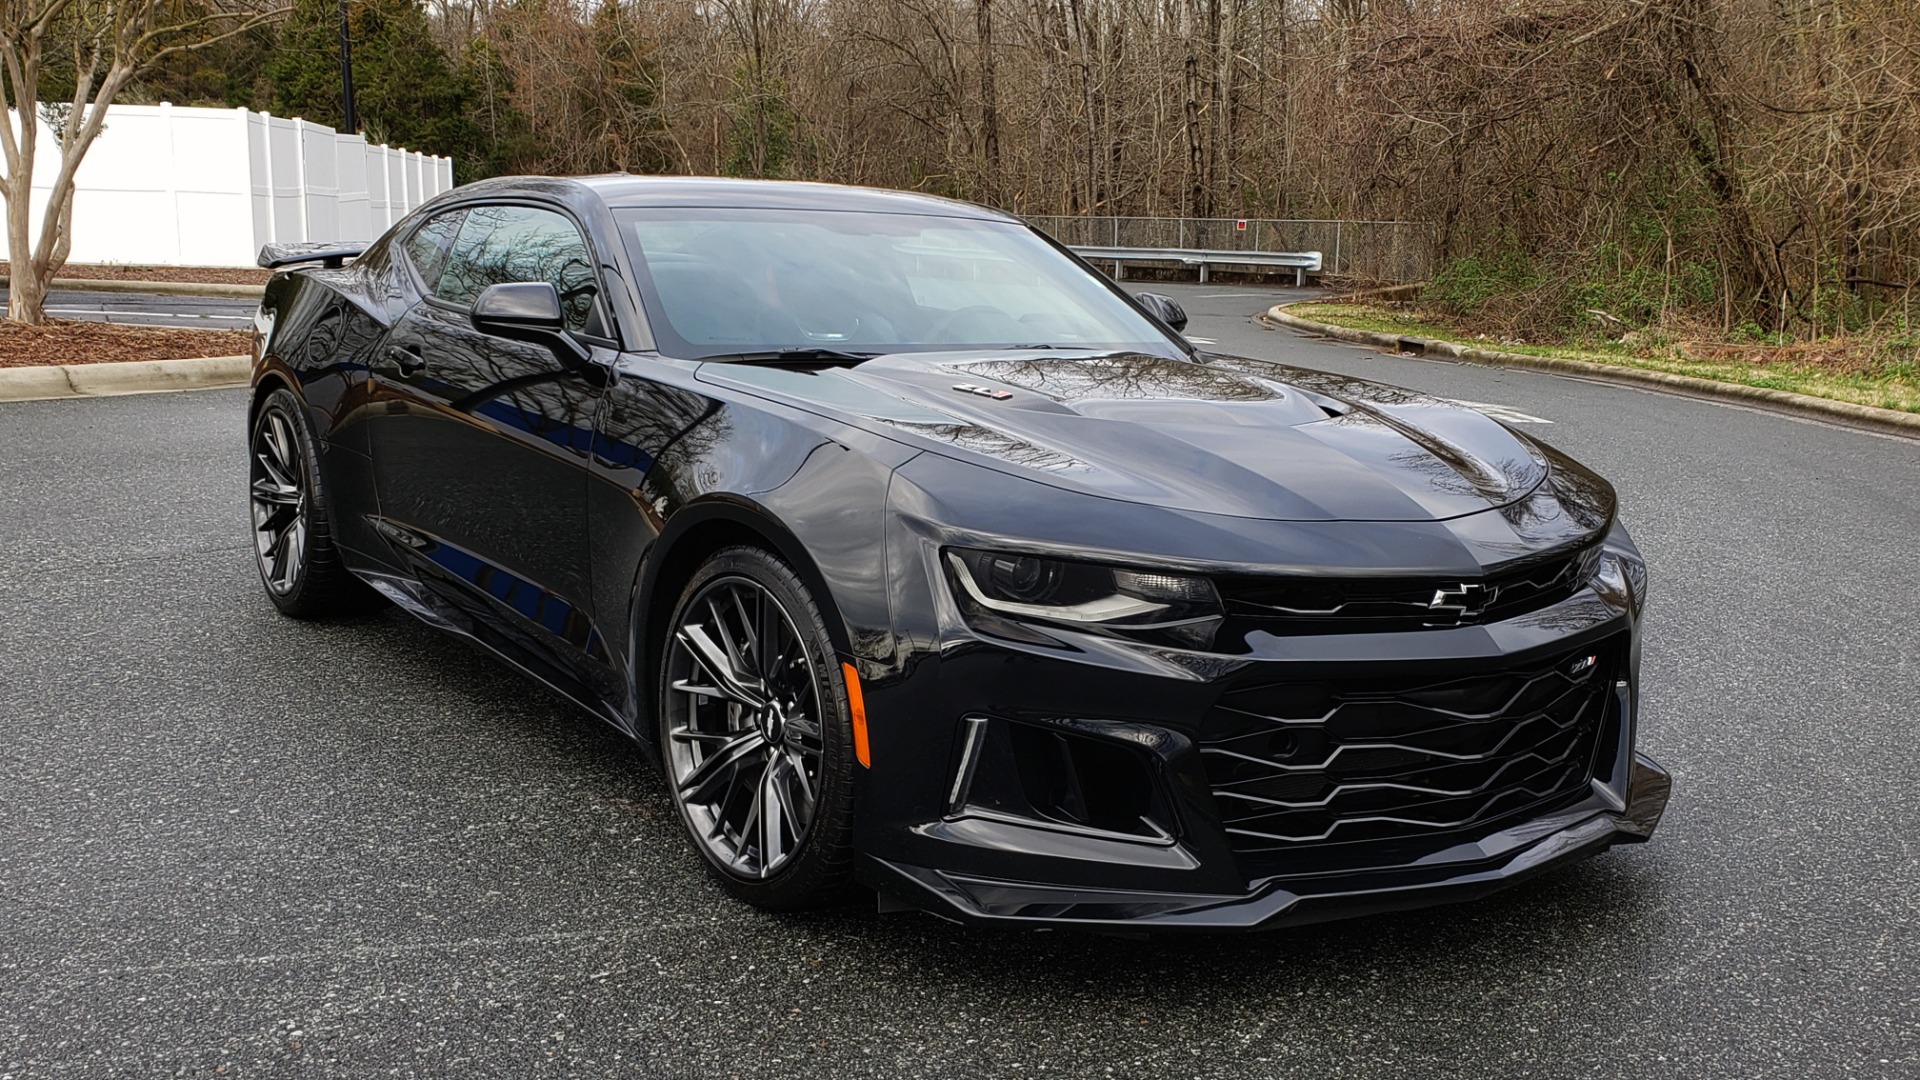 Used 2018 Chevrolet CAMARO ZL1 6.2L SUPERCHARGED V8 650 / NAV / SUNROOF / REARVIEW for sale Sold at Formula Imports in Charlotte NC 28227 6